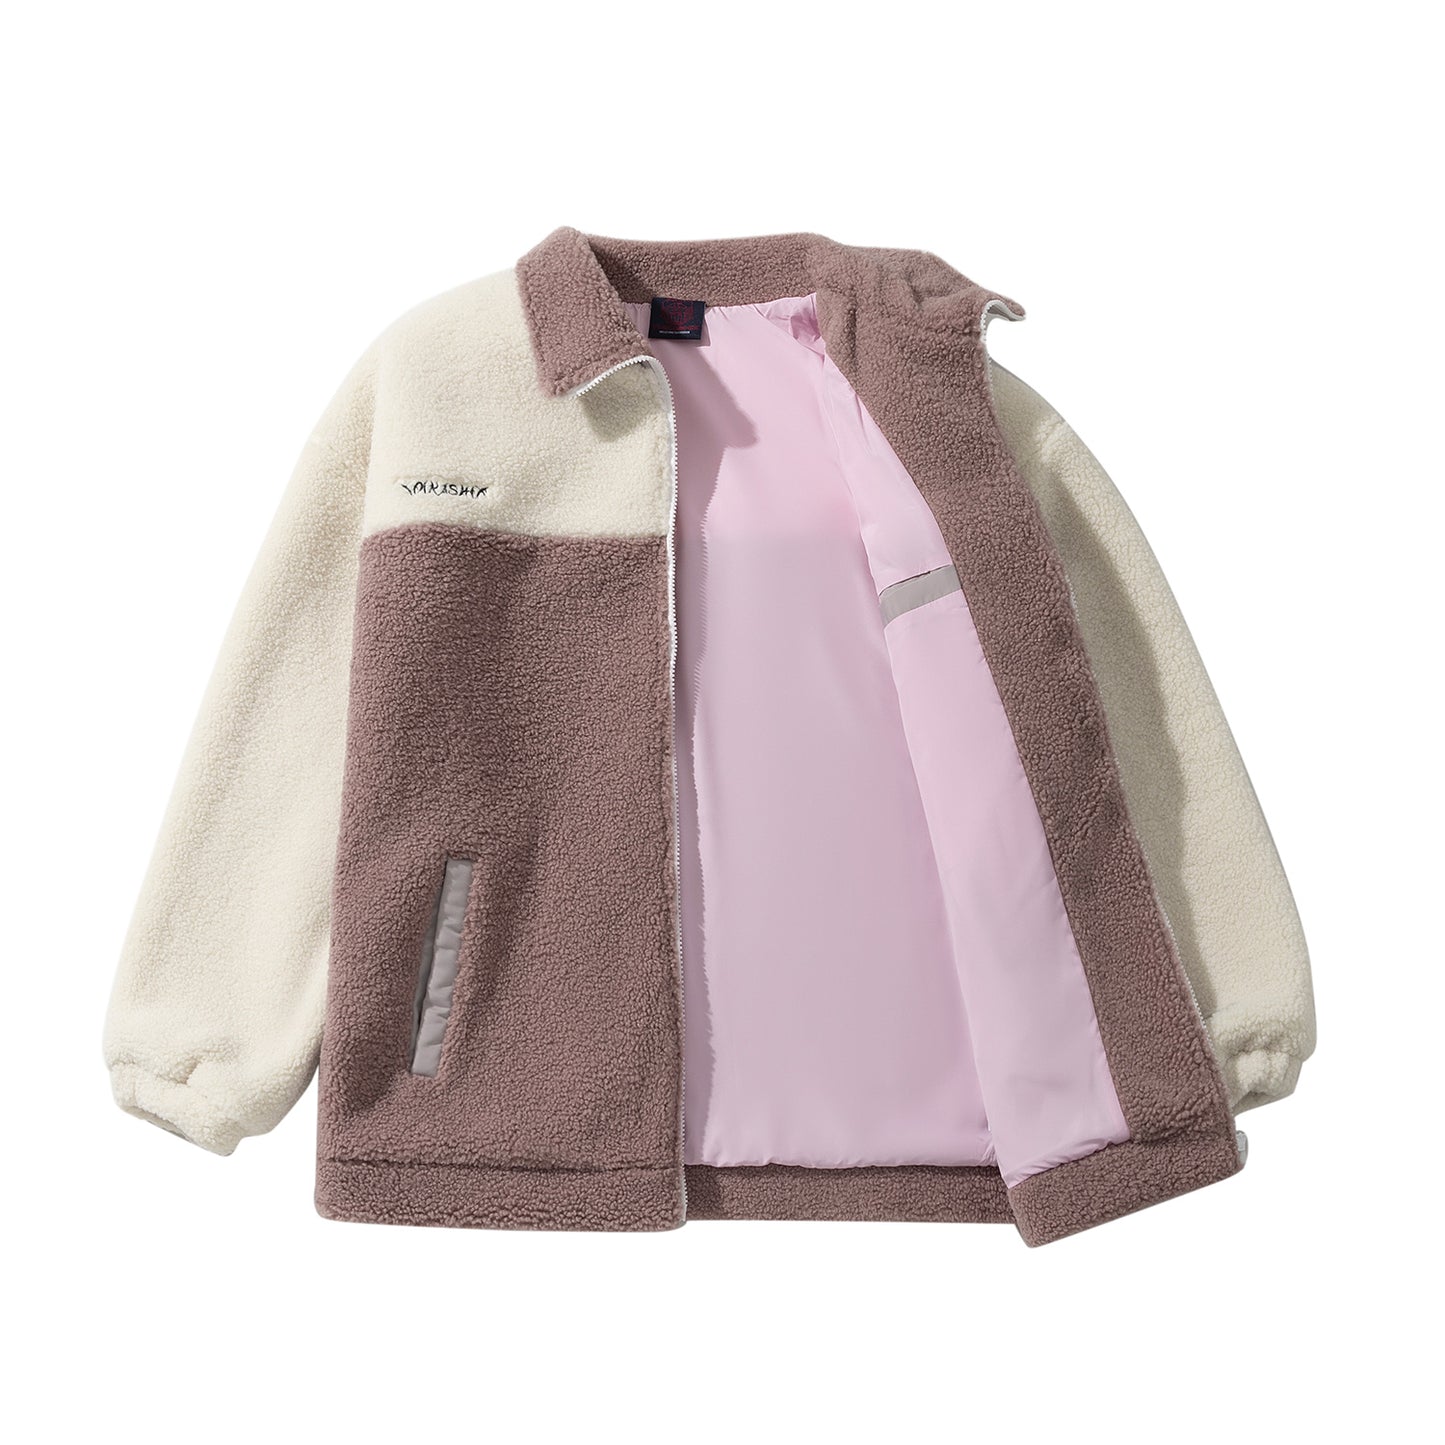 Jacket Hellcome to Firedise, Dusty pink White